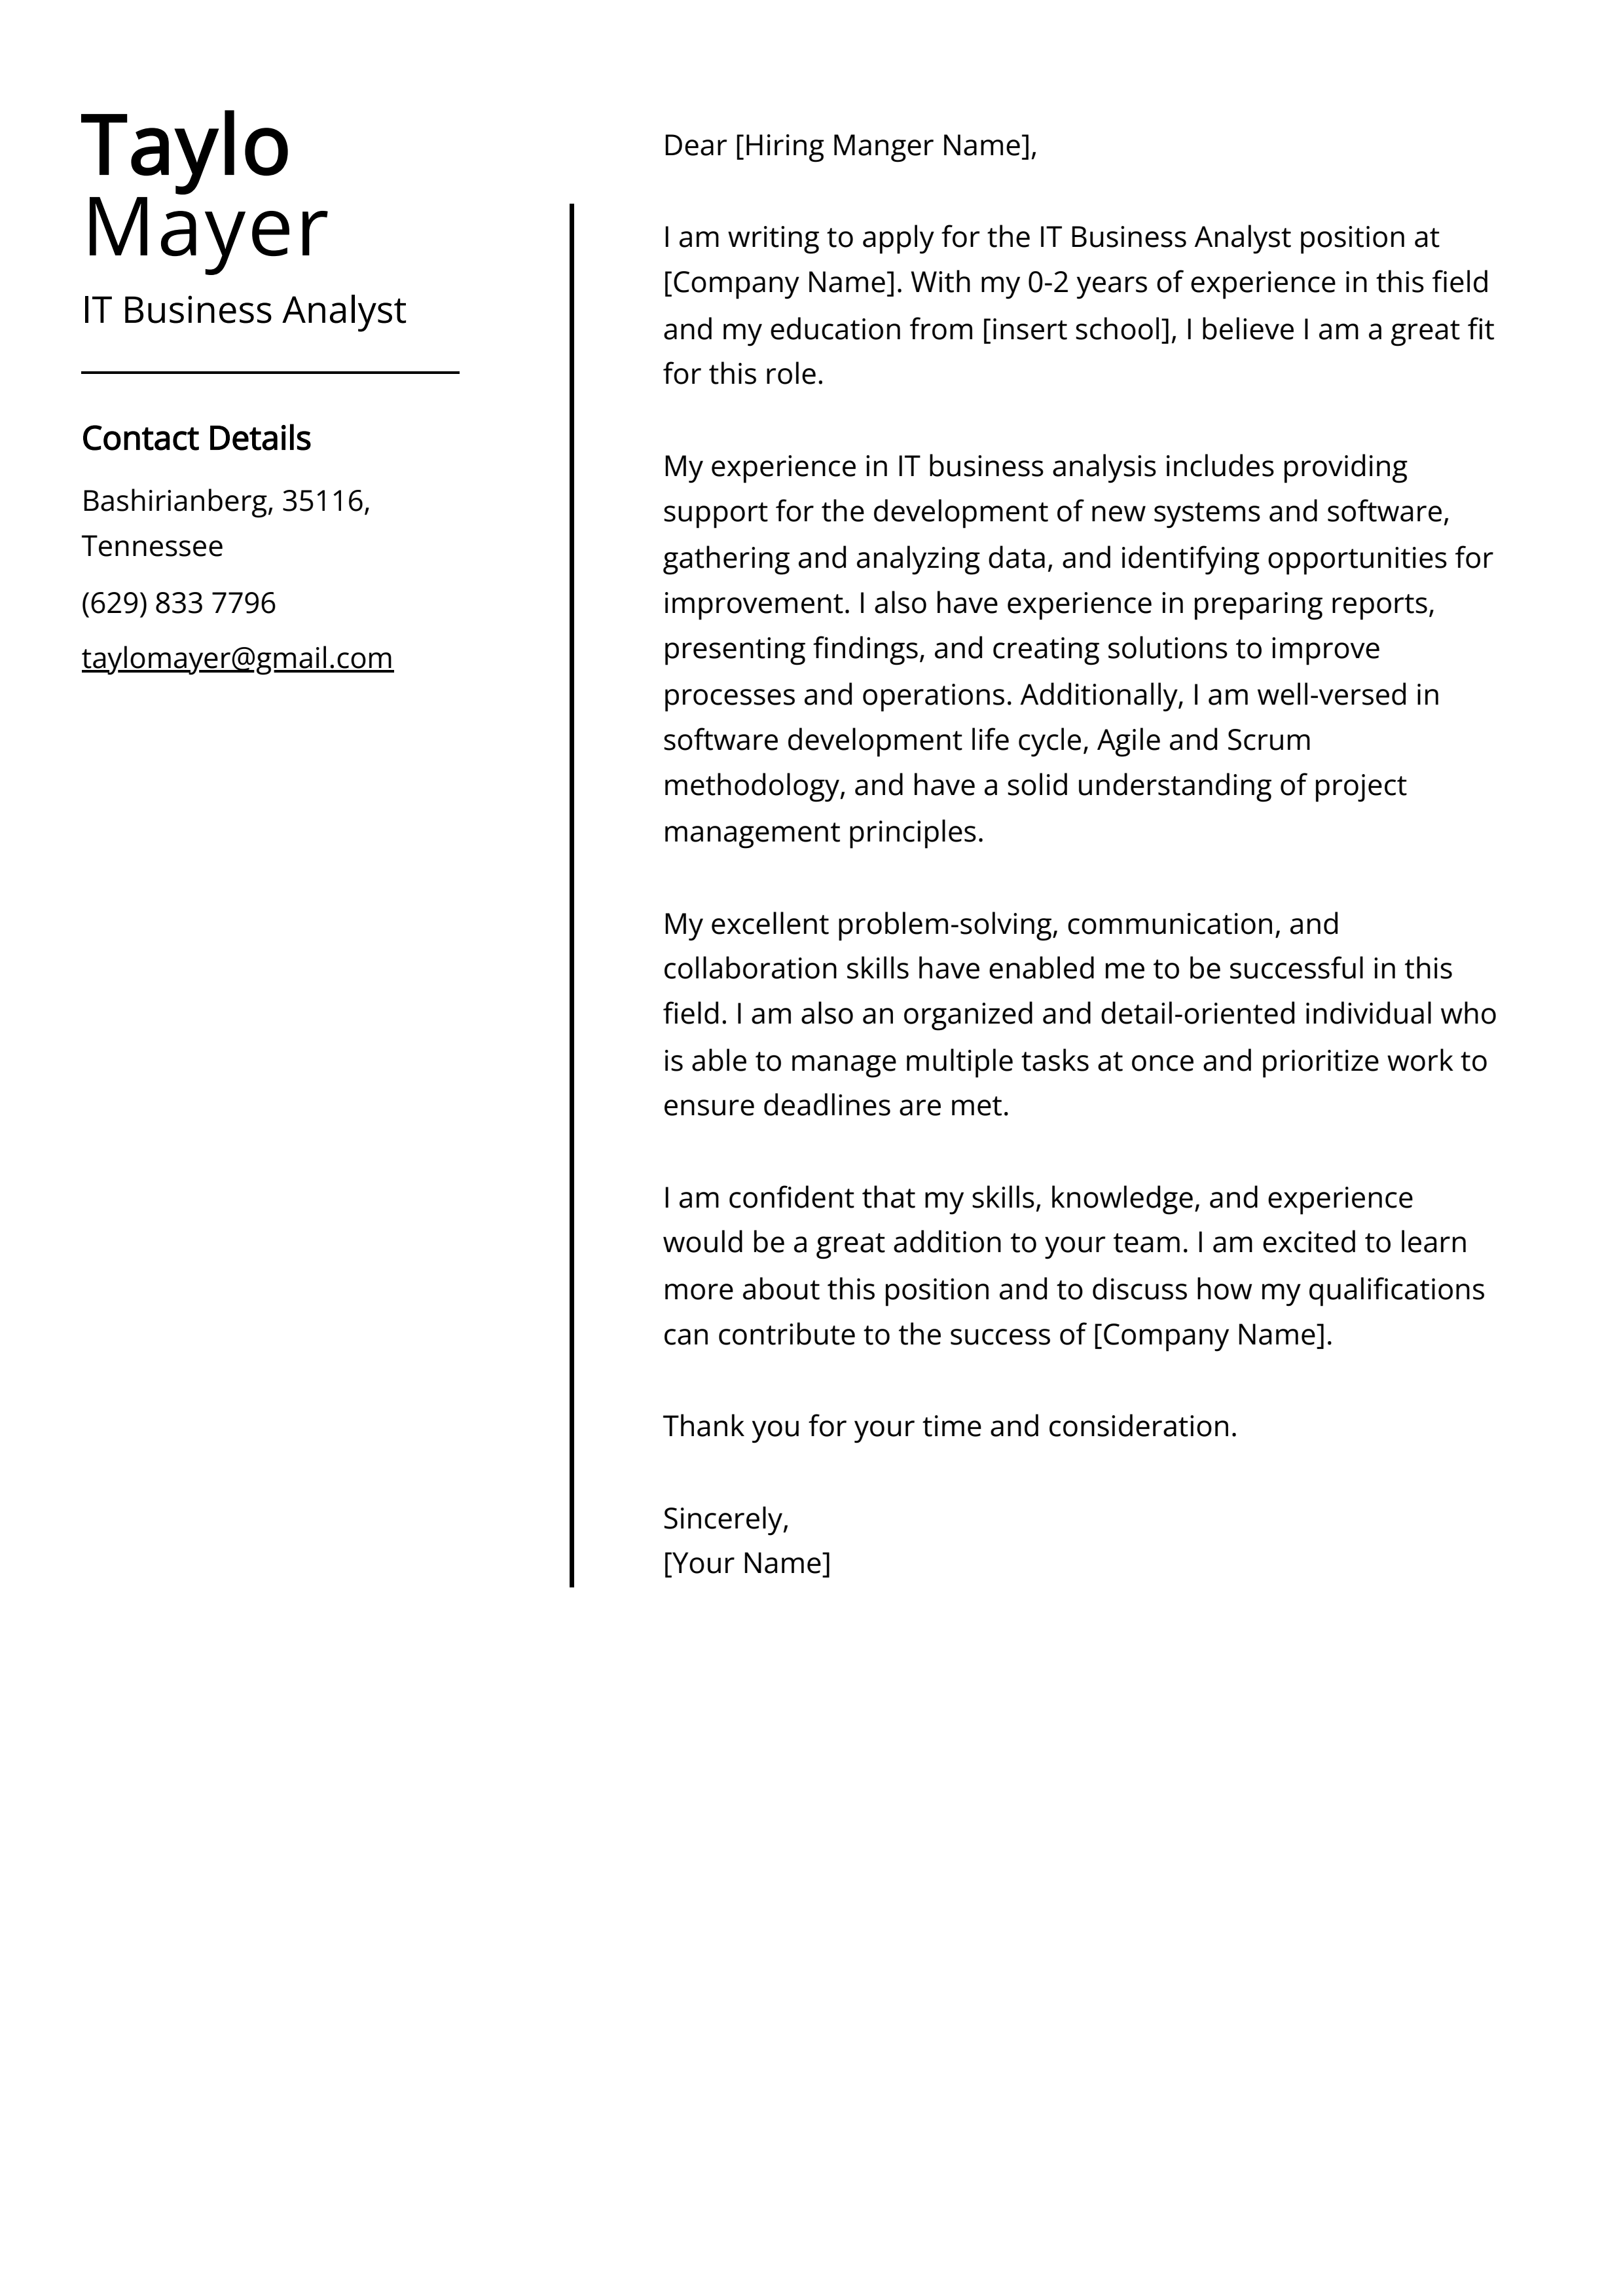 IT Business Analyst Cover Letter Example